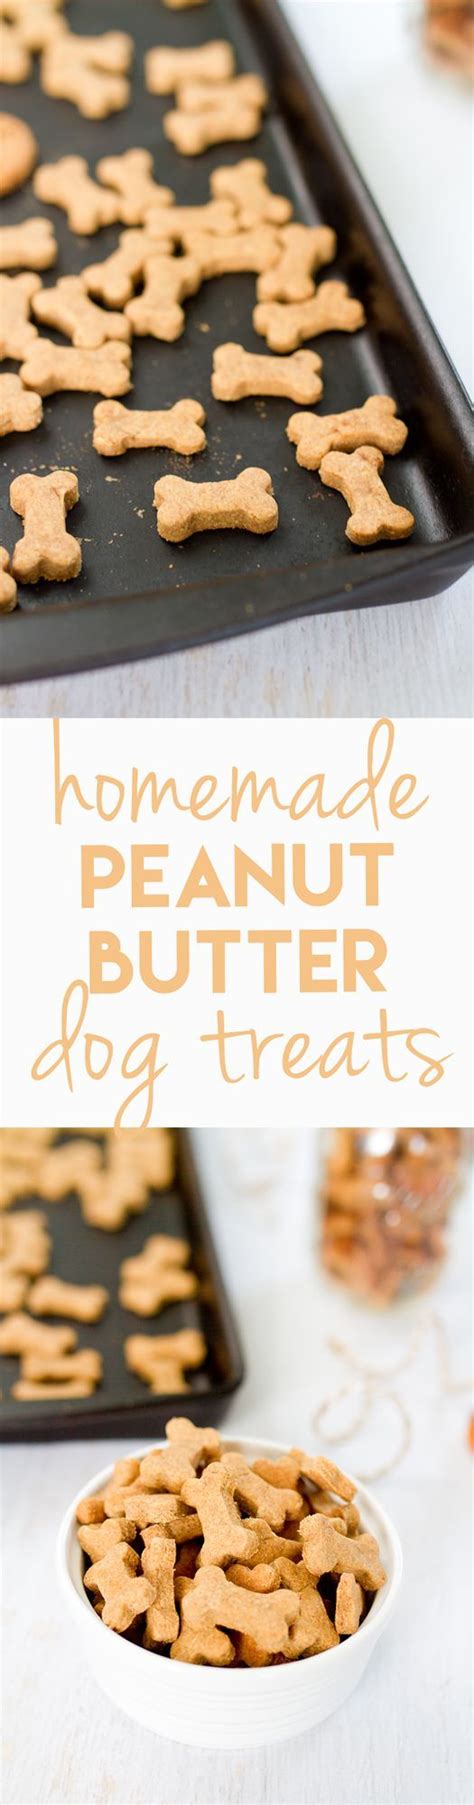 Homemade Peanut Butter Dog Treats In A White Bowl And On A Black Tray